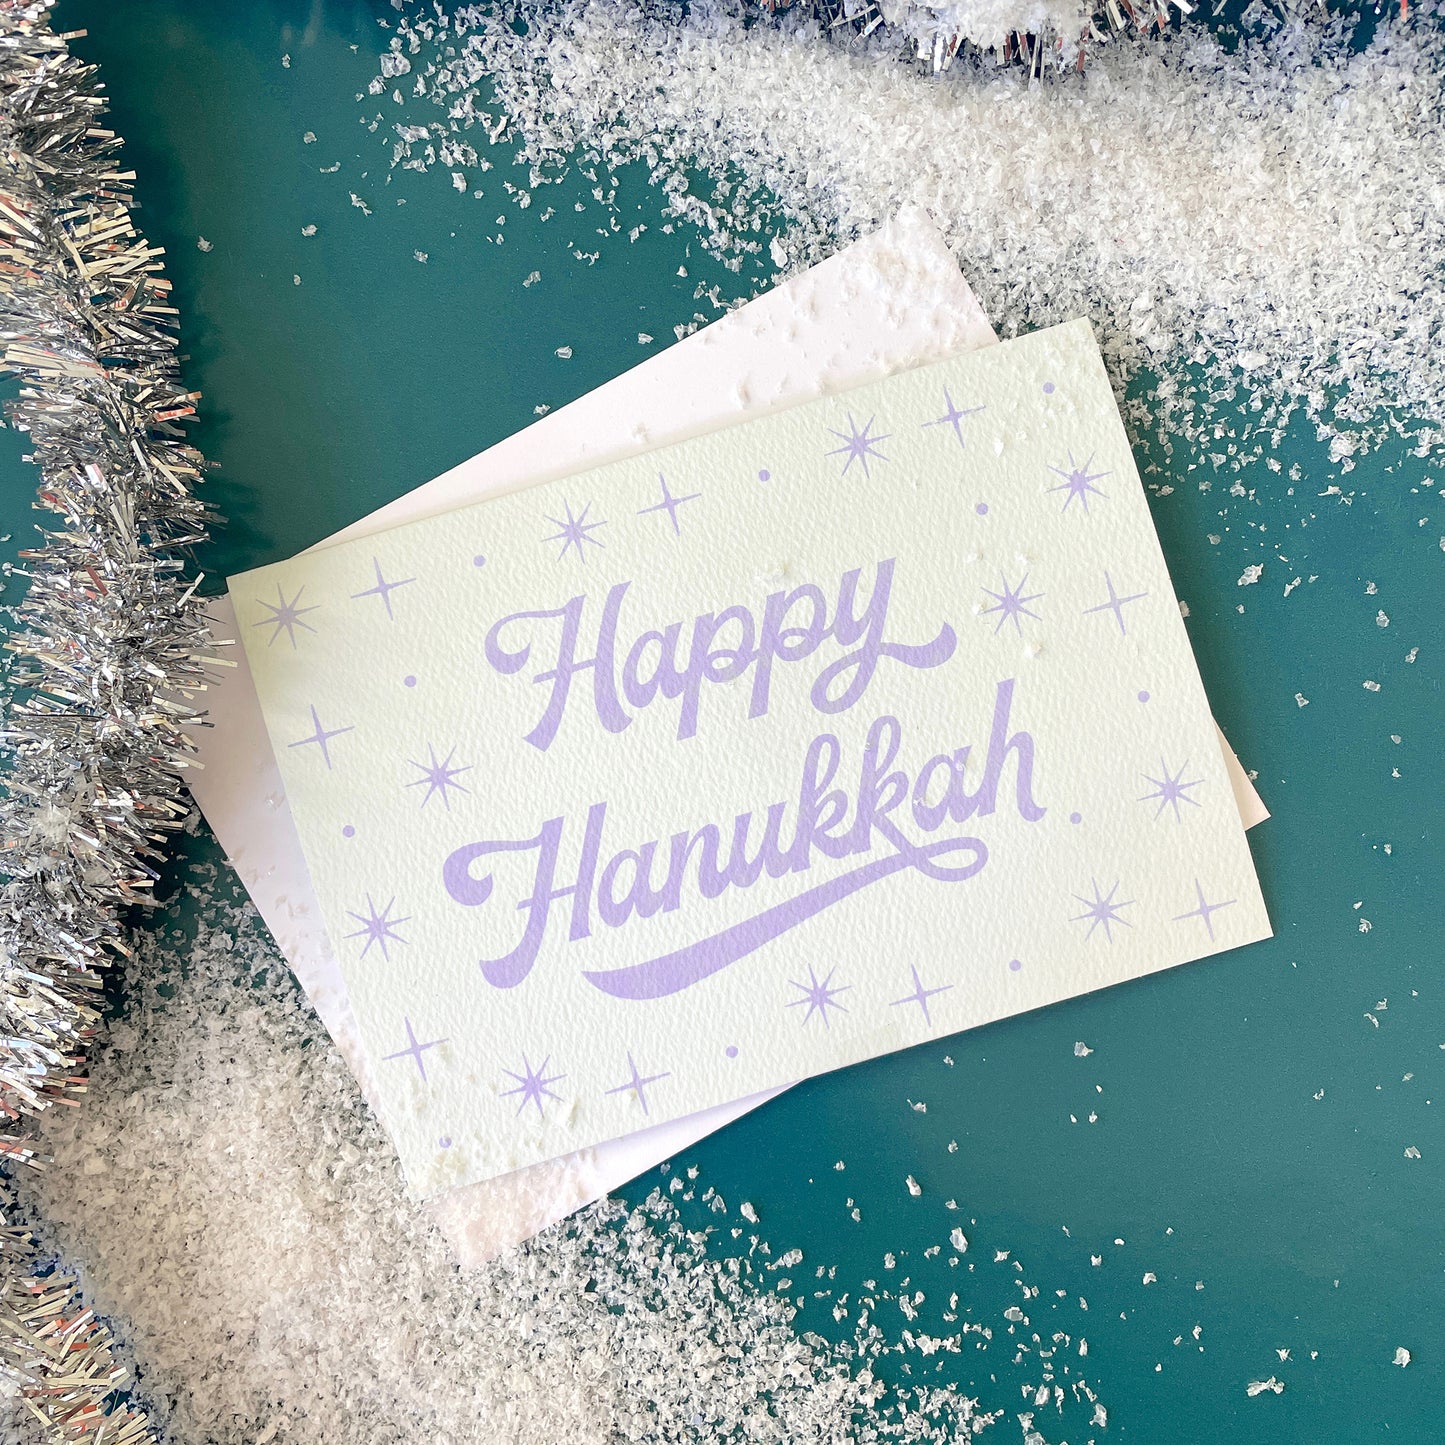 On a teal background is a light blue card that reads, "Happy Hanukkah" with sparkling stars designs around it.